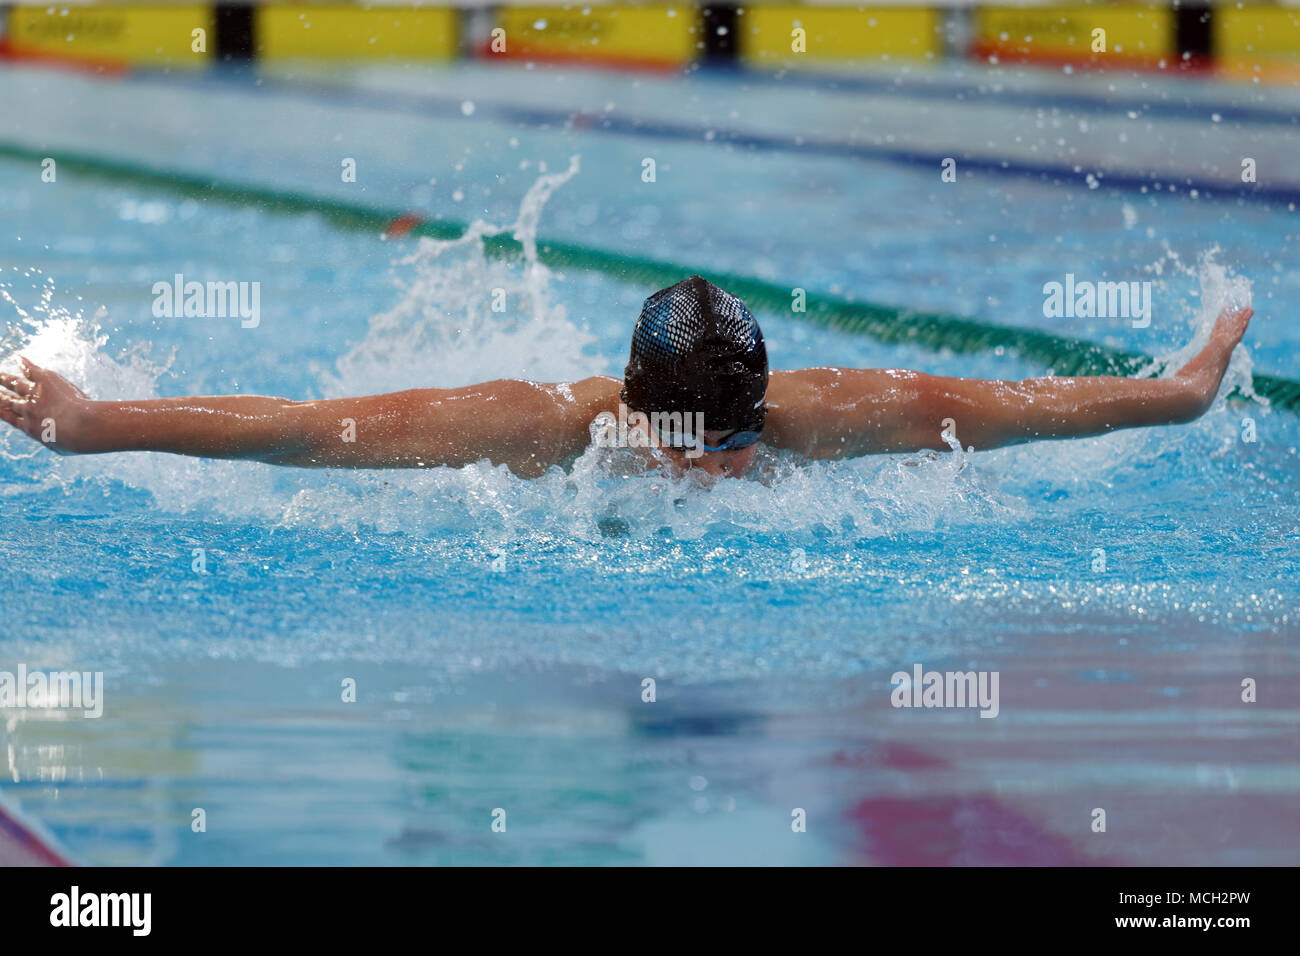 St. Petersburg, Russia - April 11, 2018: Men compete in 100m butterfly swimming during All-Russian Swimming Competitions Merry Dolphin. The competitio Stock Photo